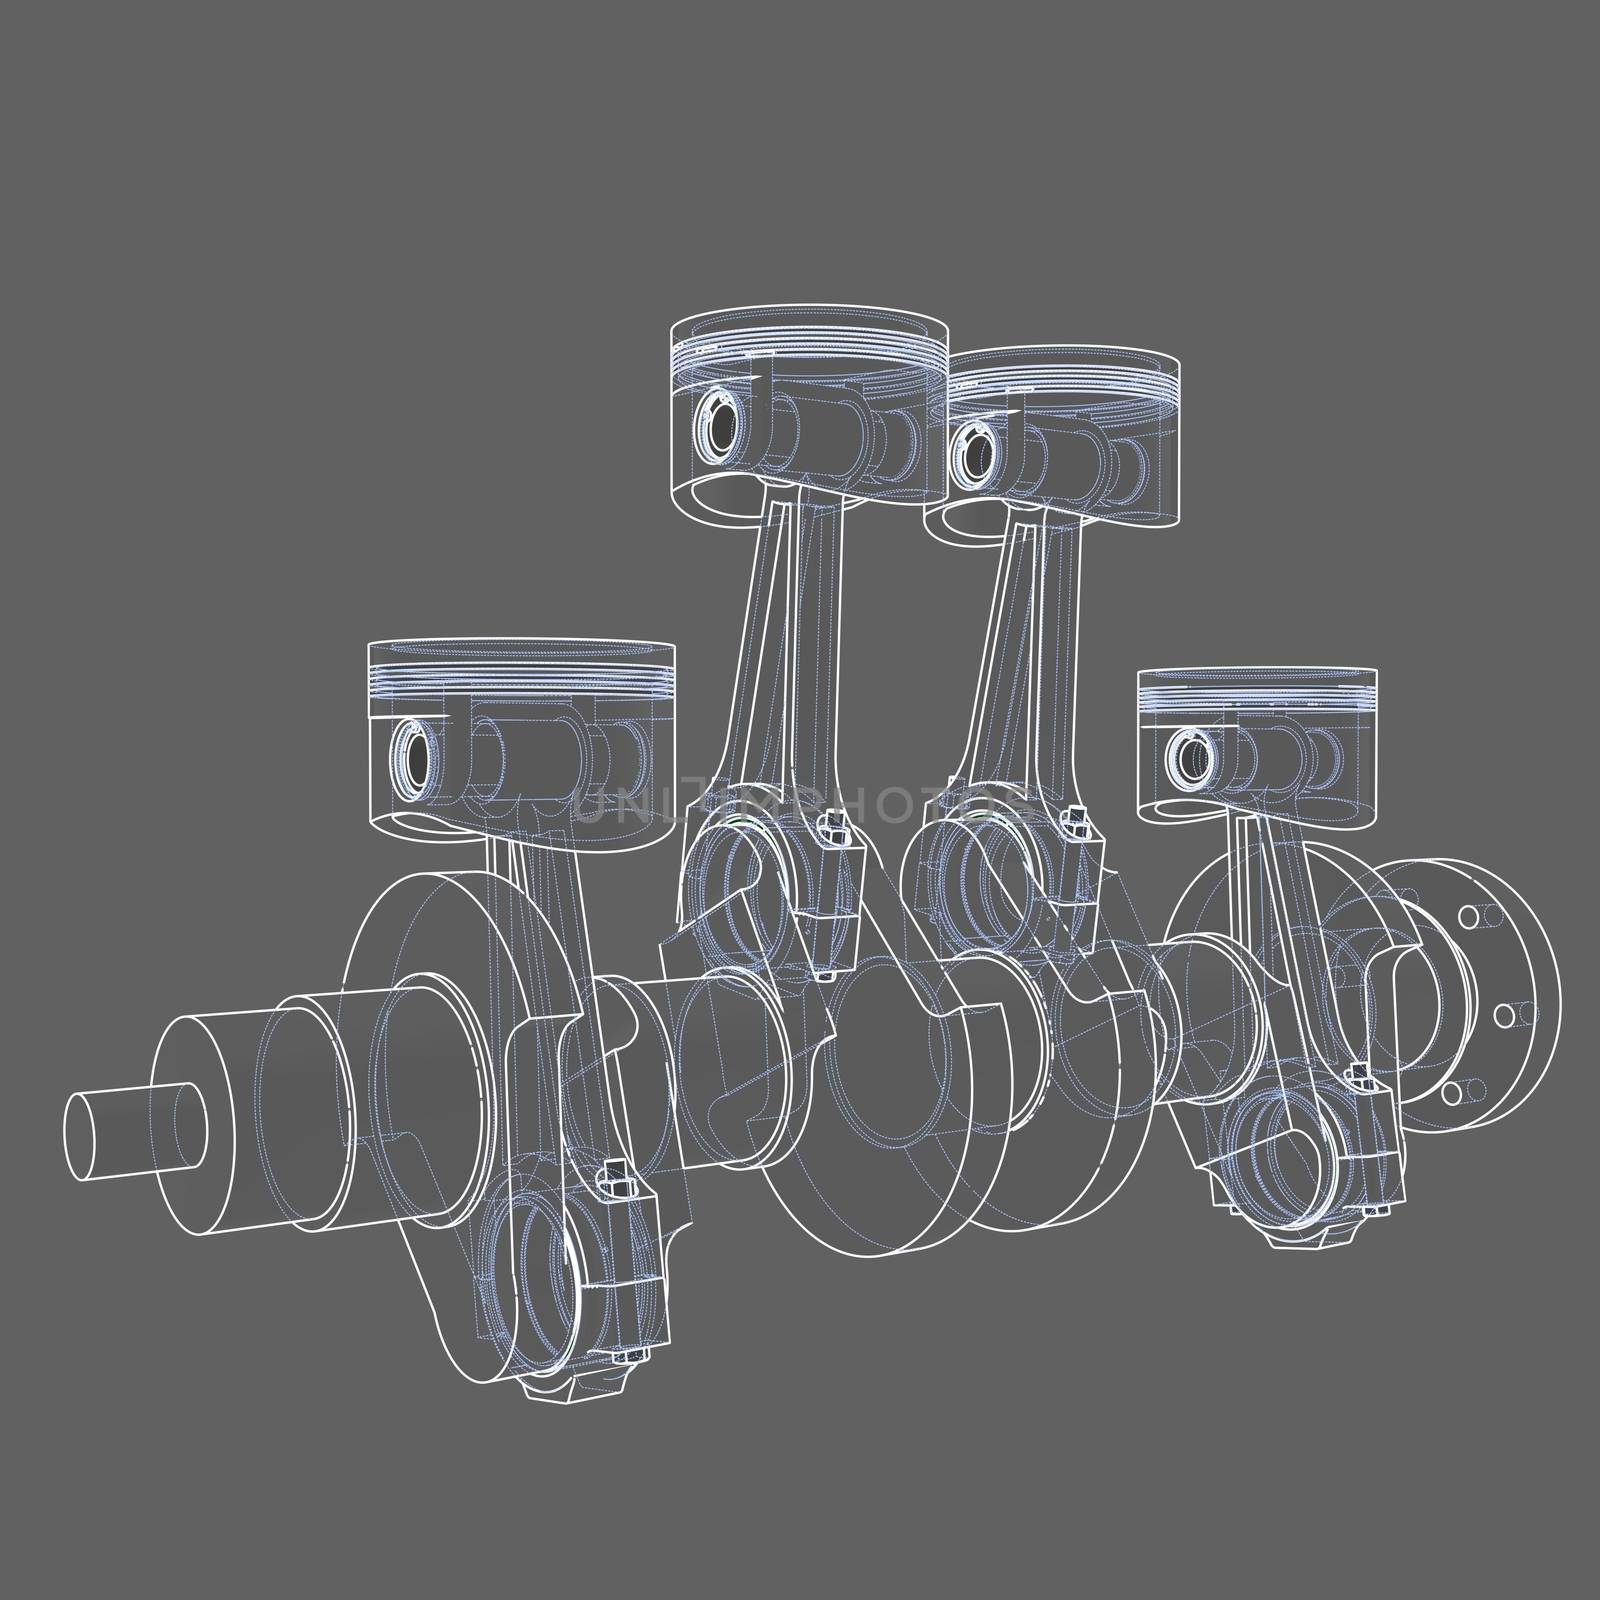 Engine pistons outline. 3D illustration. White lines and grey background